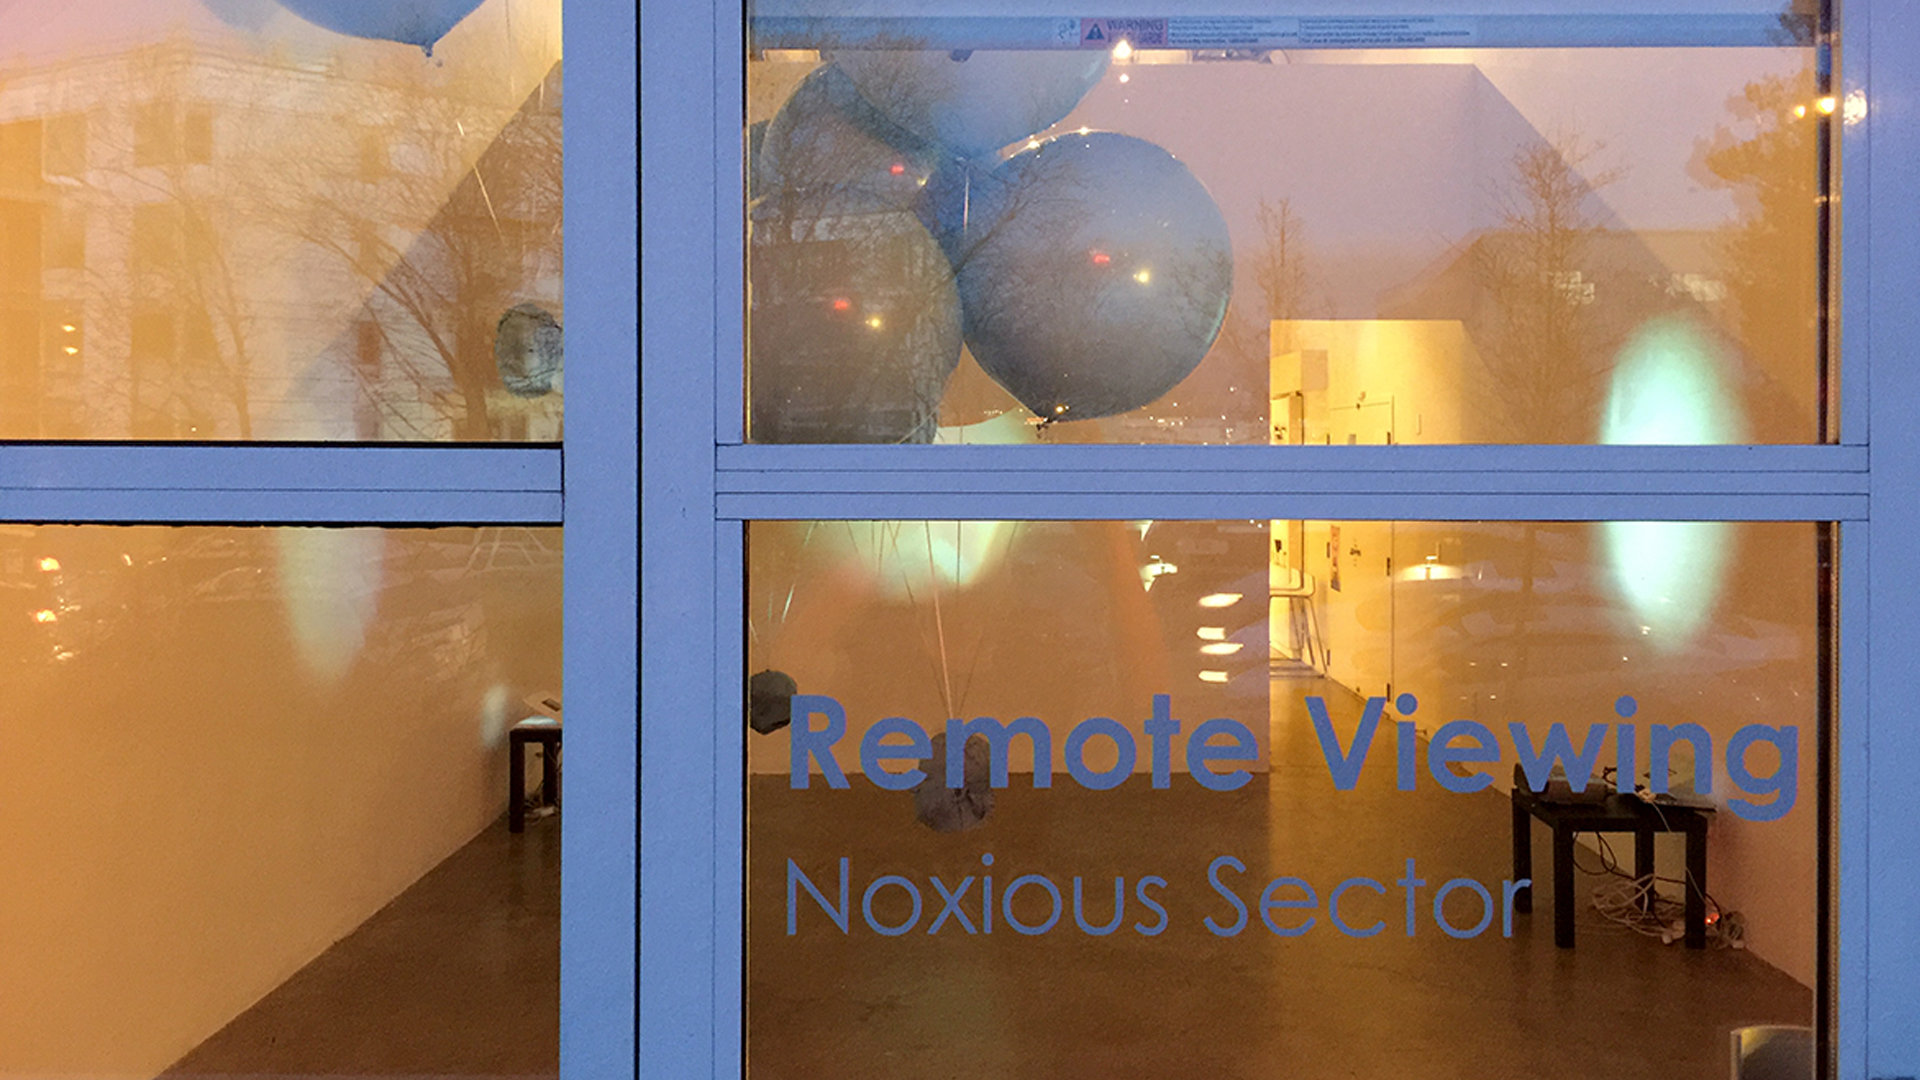 Noxious Sector: Remote Viewing